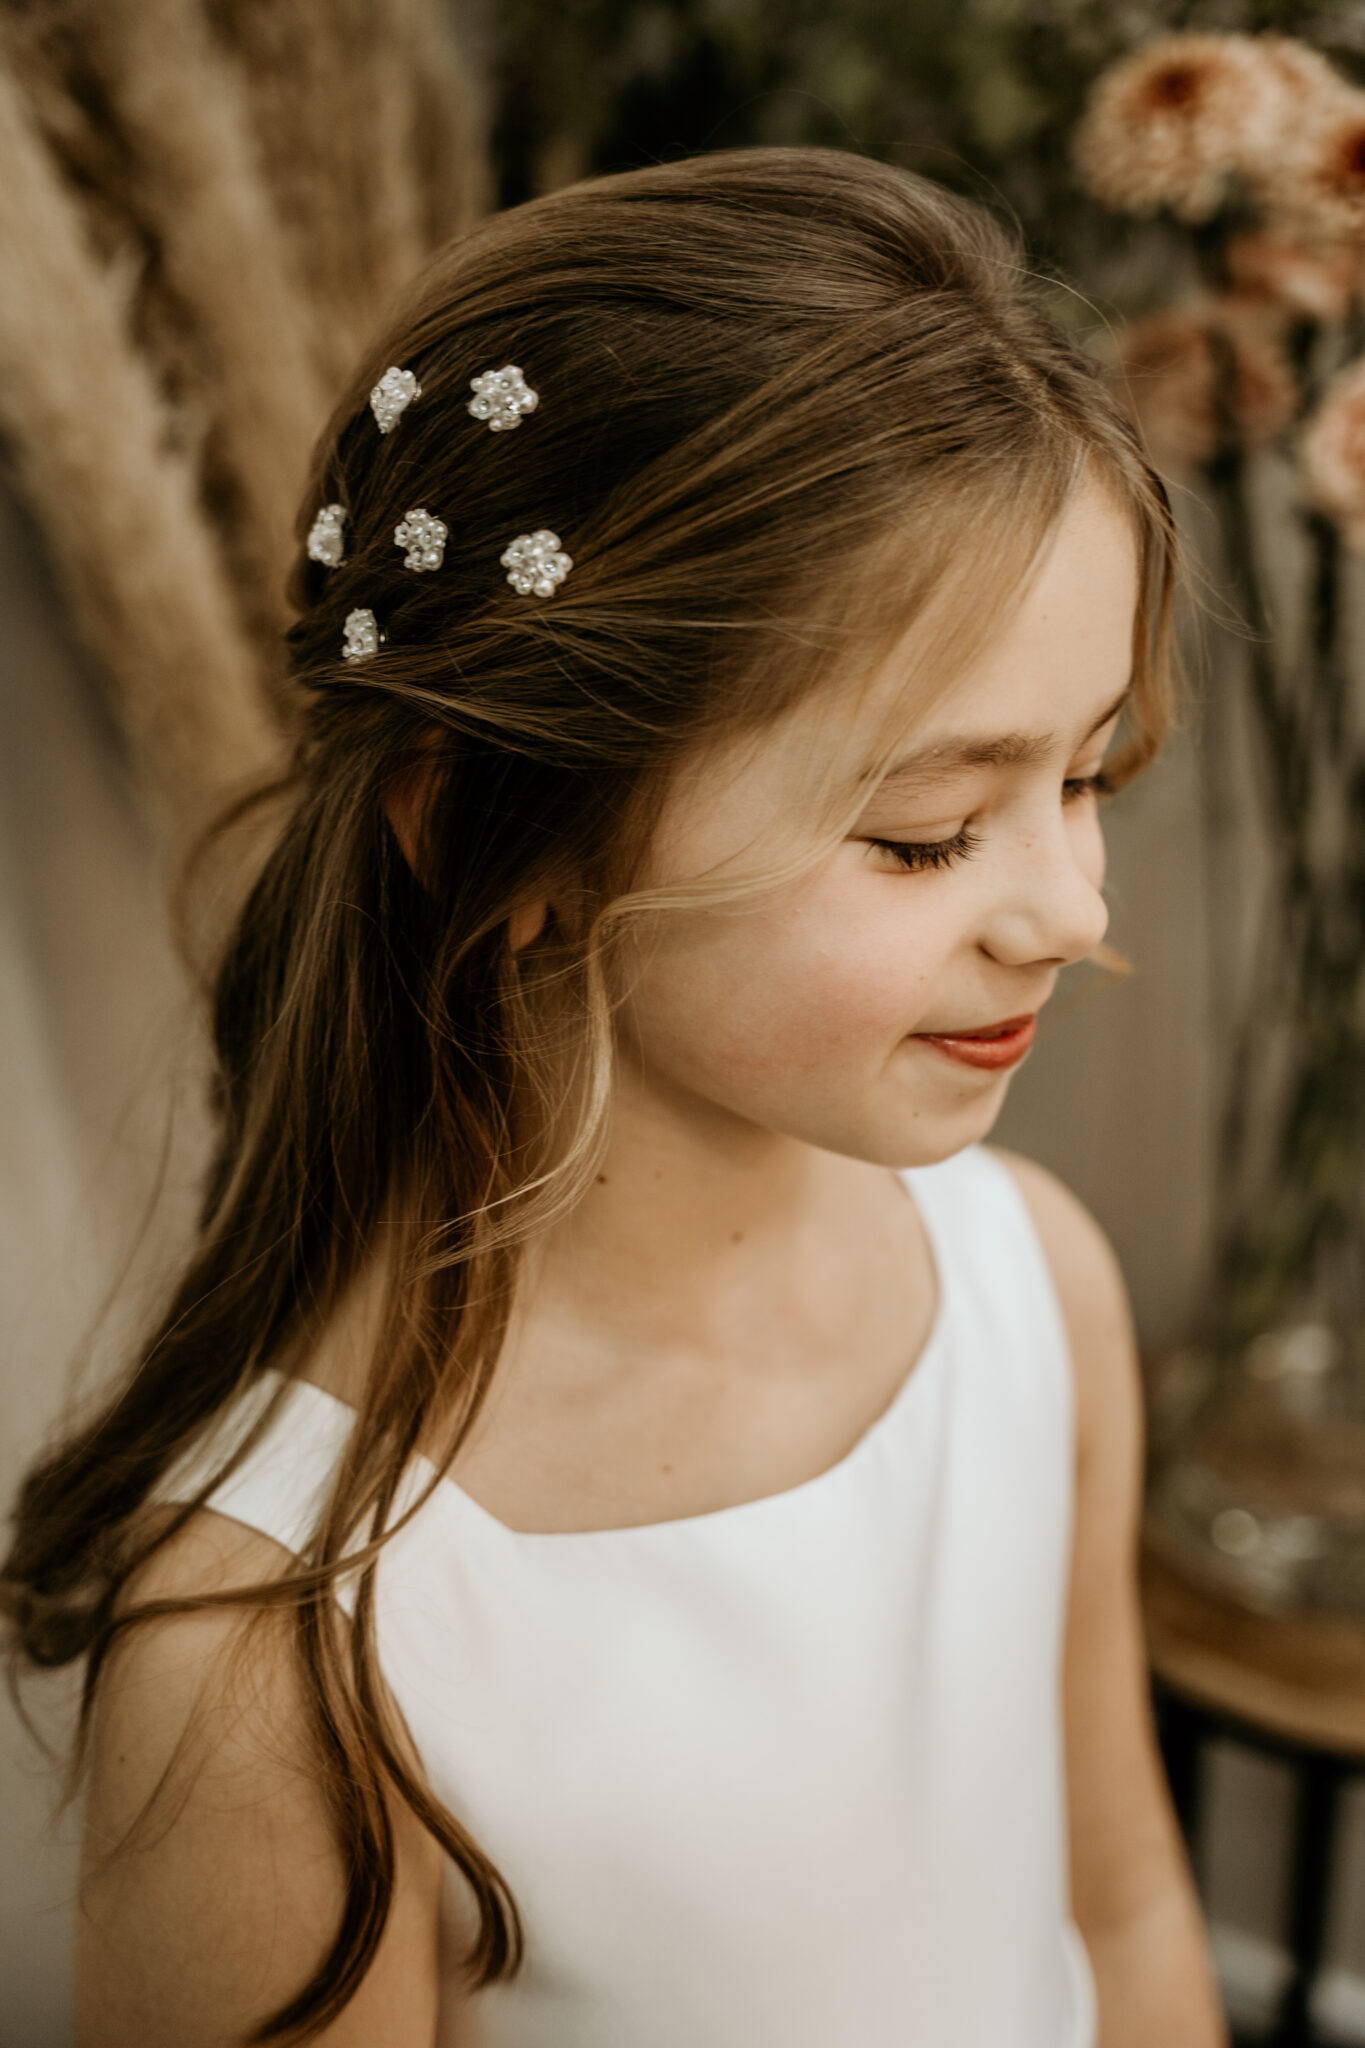 How to Accessorise Your Daughter’s Confirmation Dress